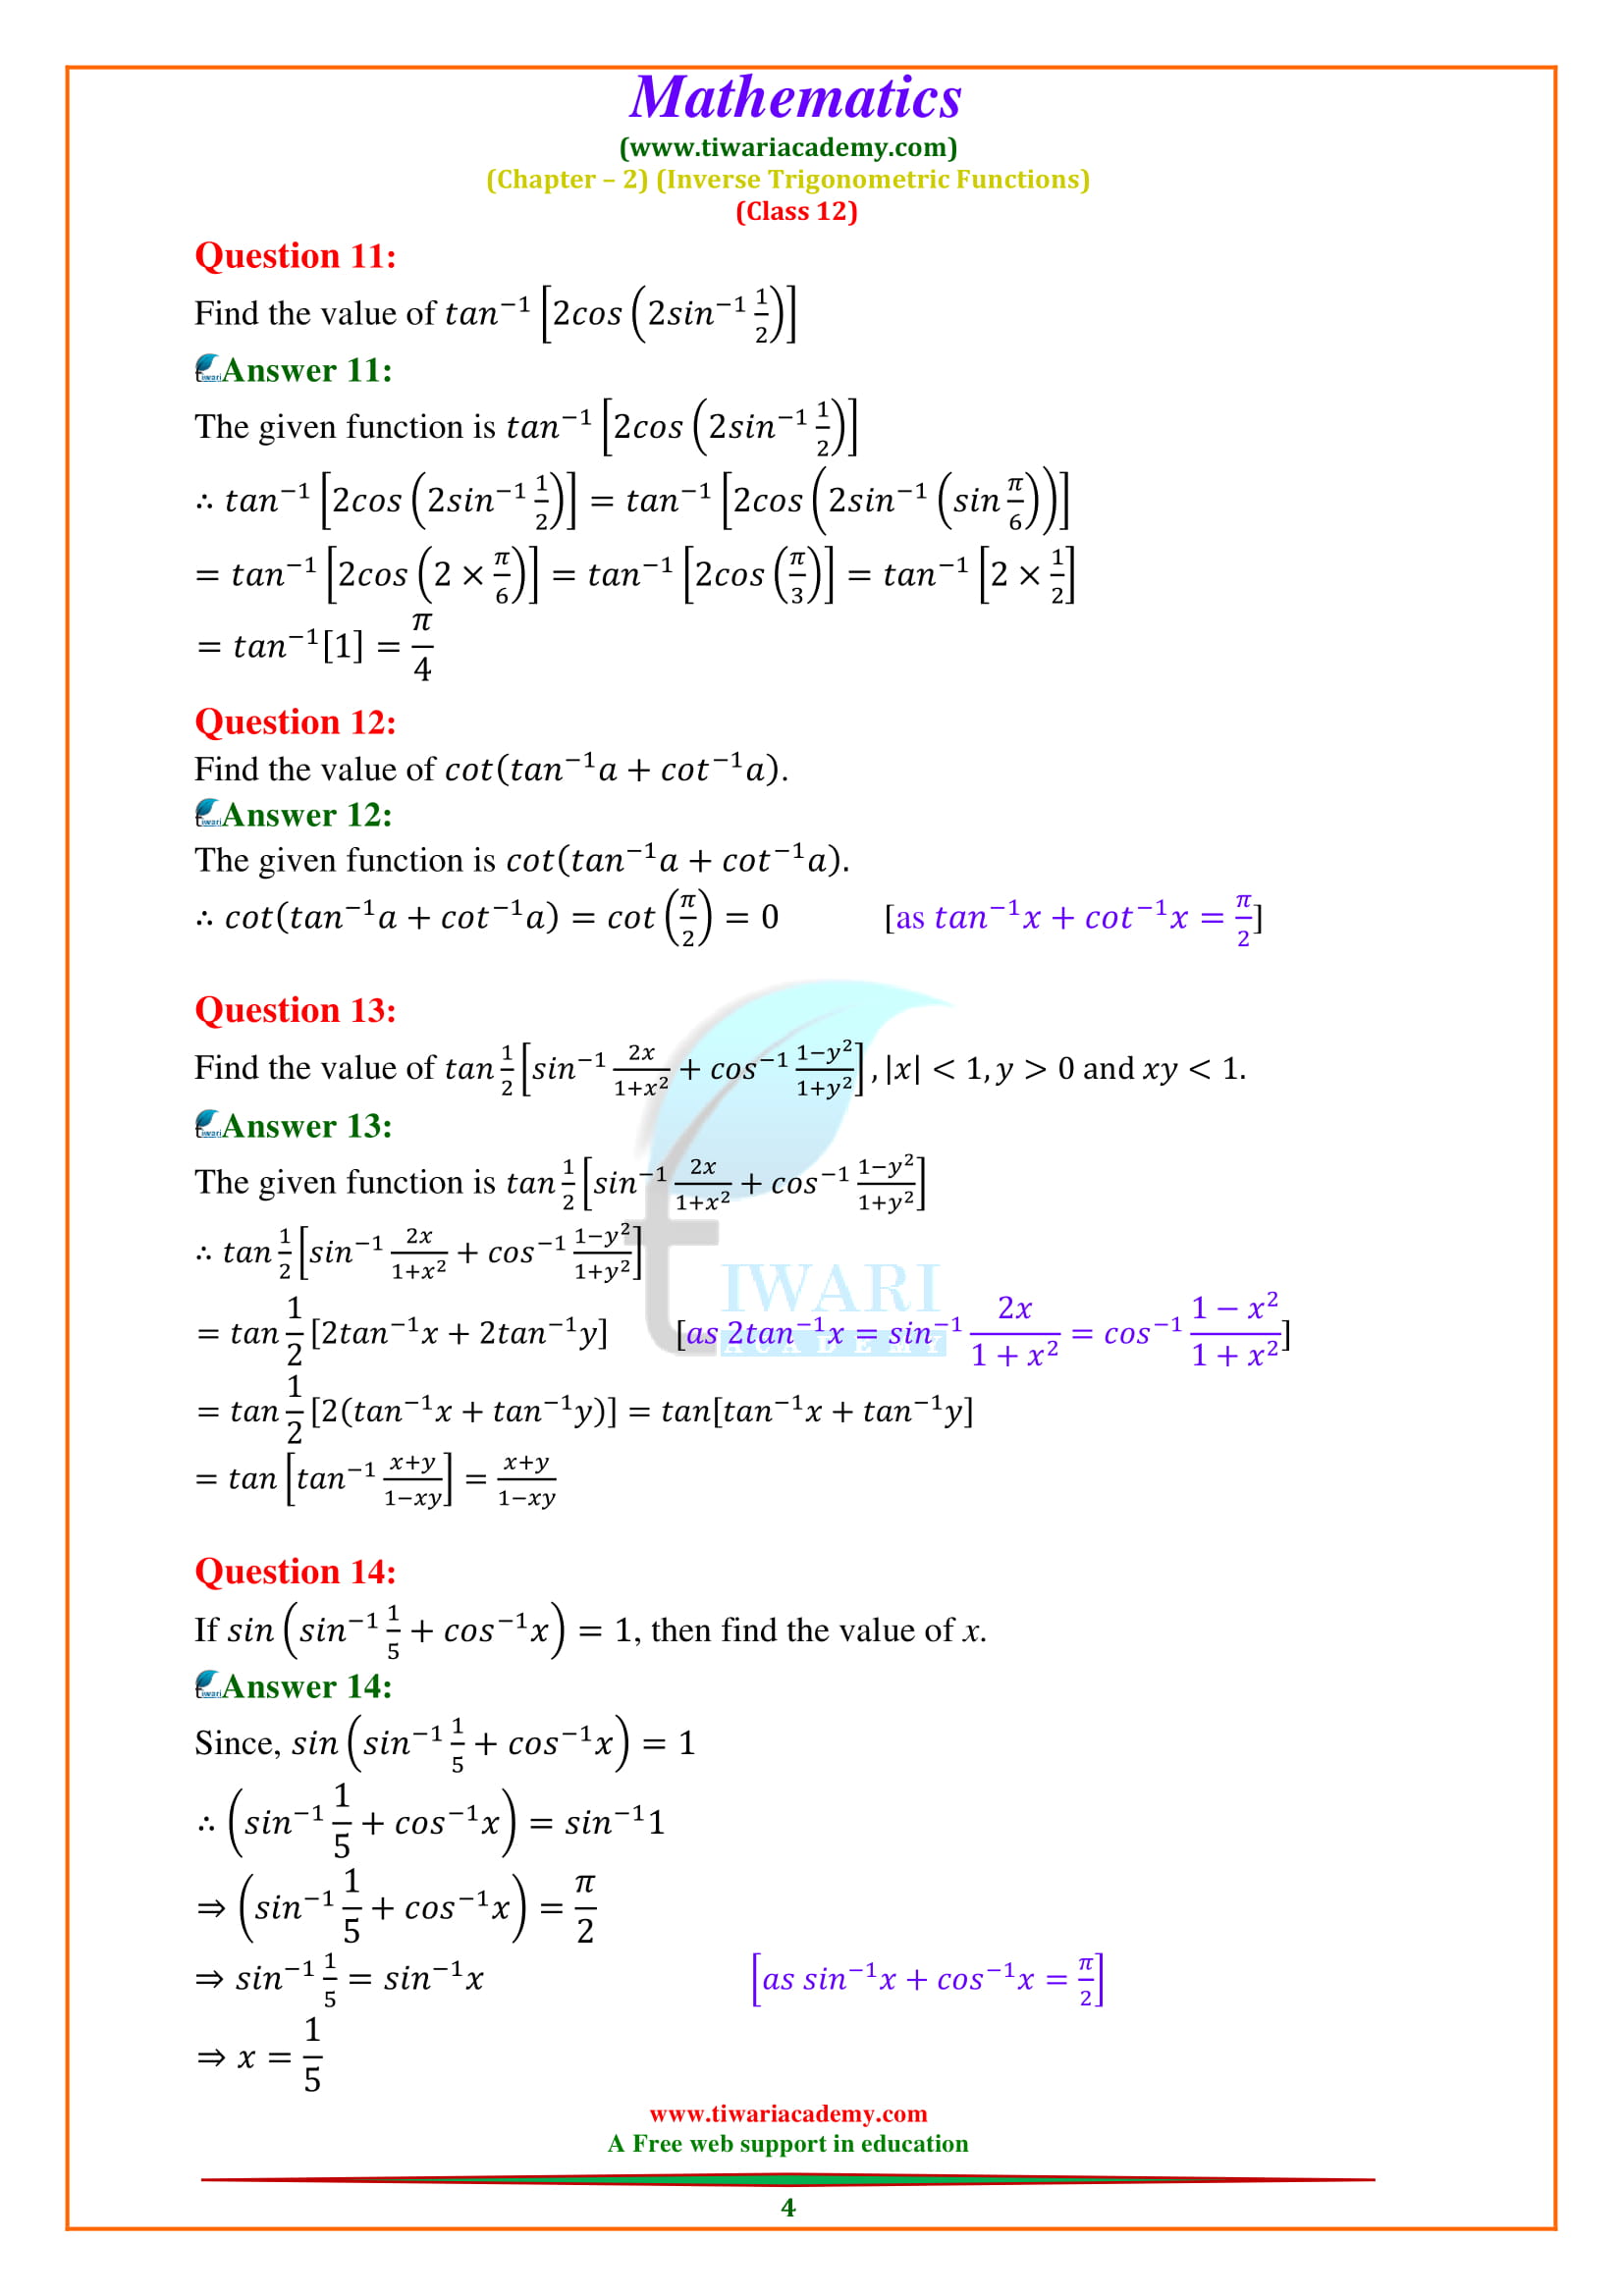 Class 12 Maths Chapter 2 Exercise 2.2 sols update for 2018-19